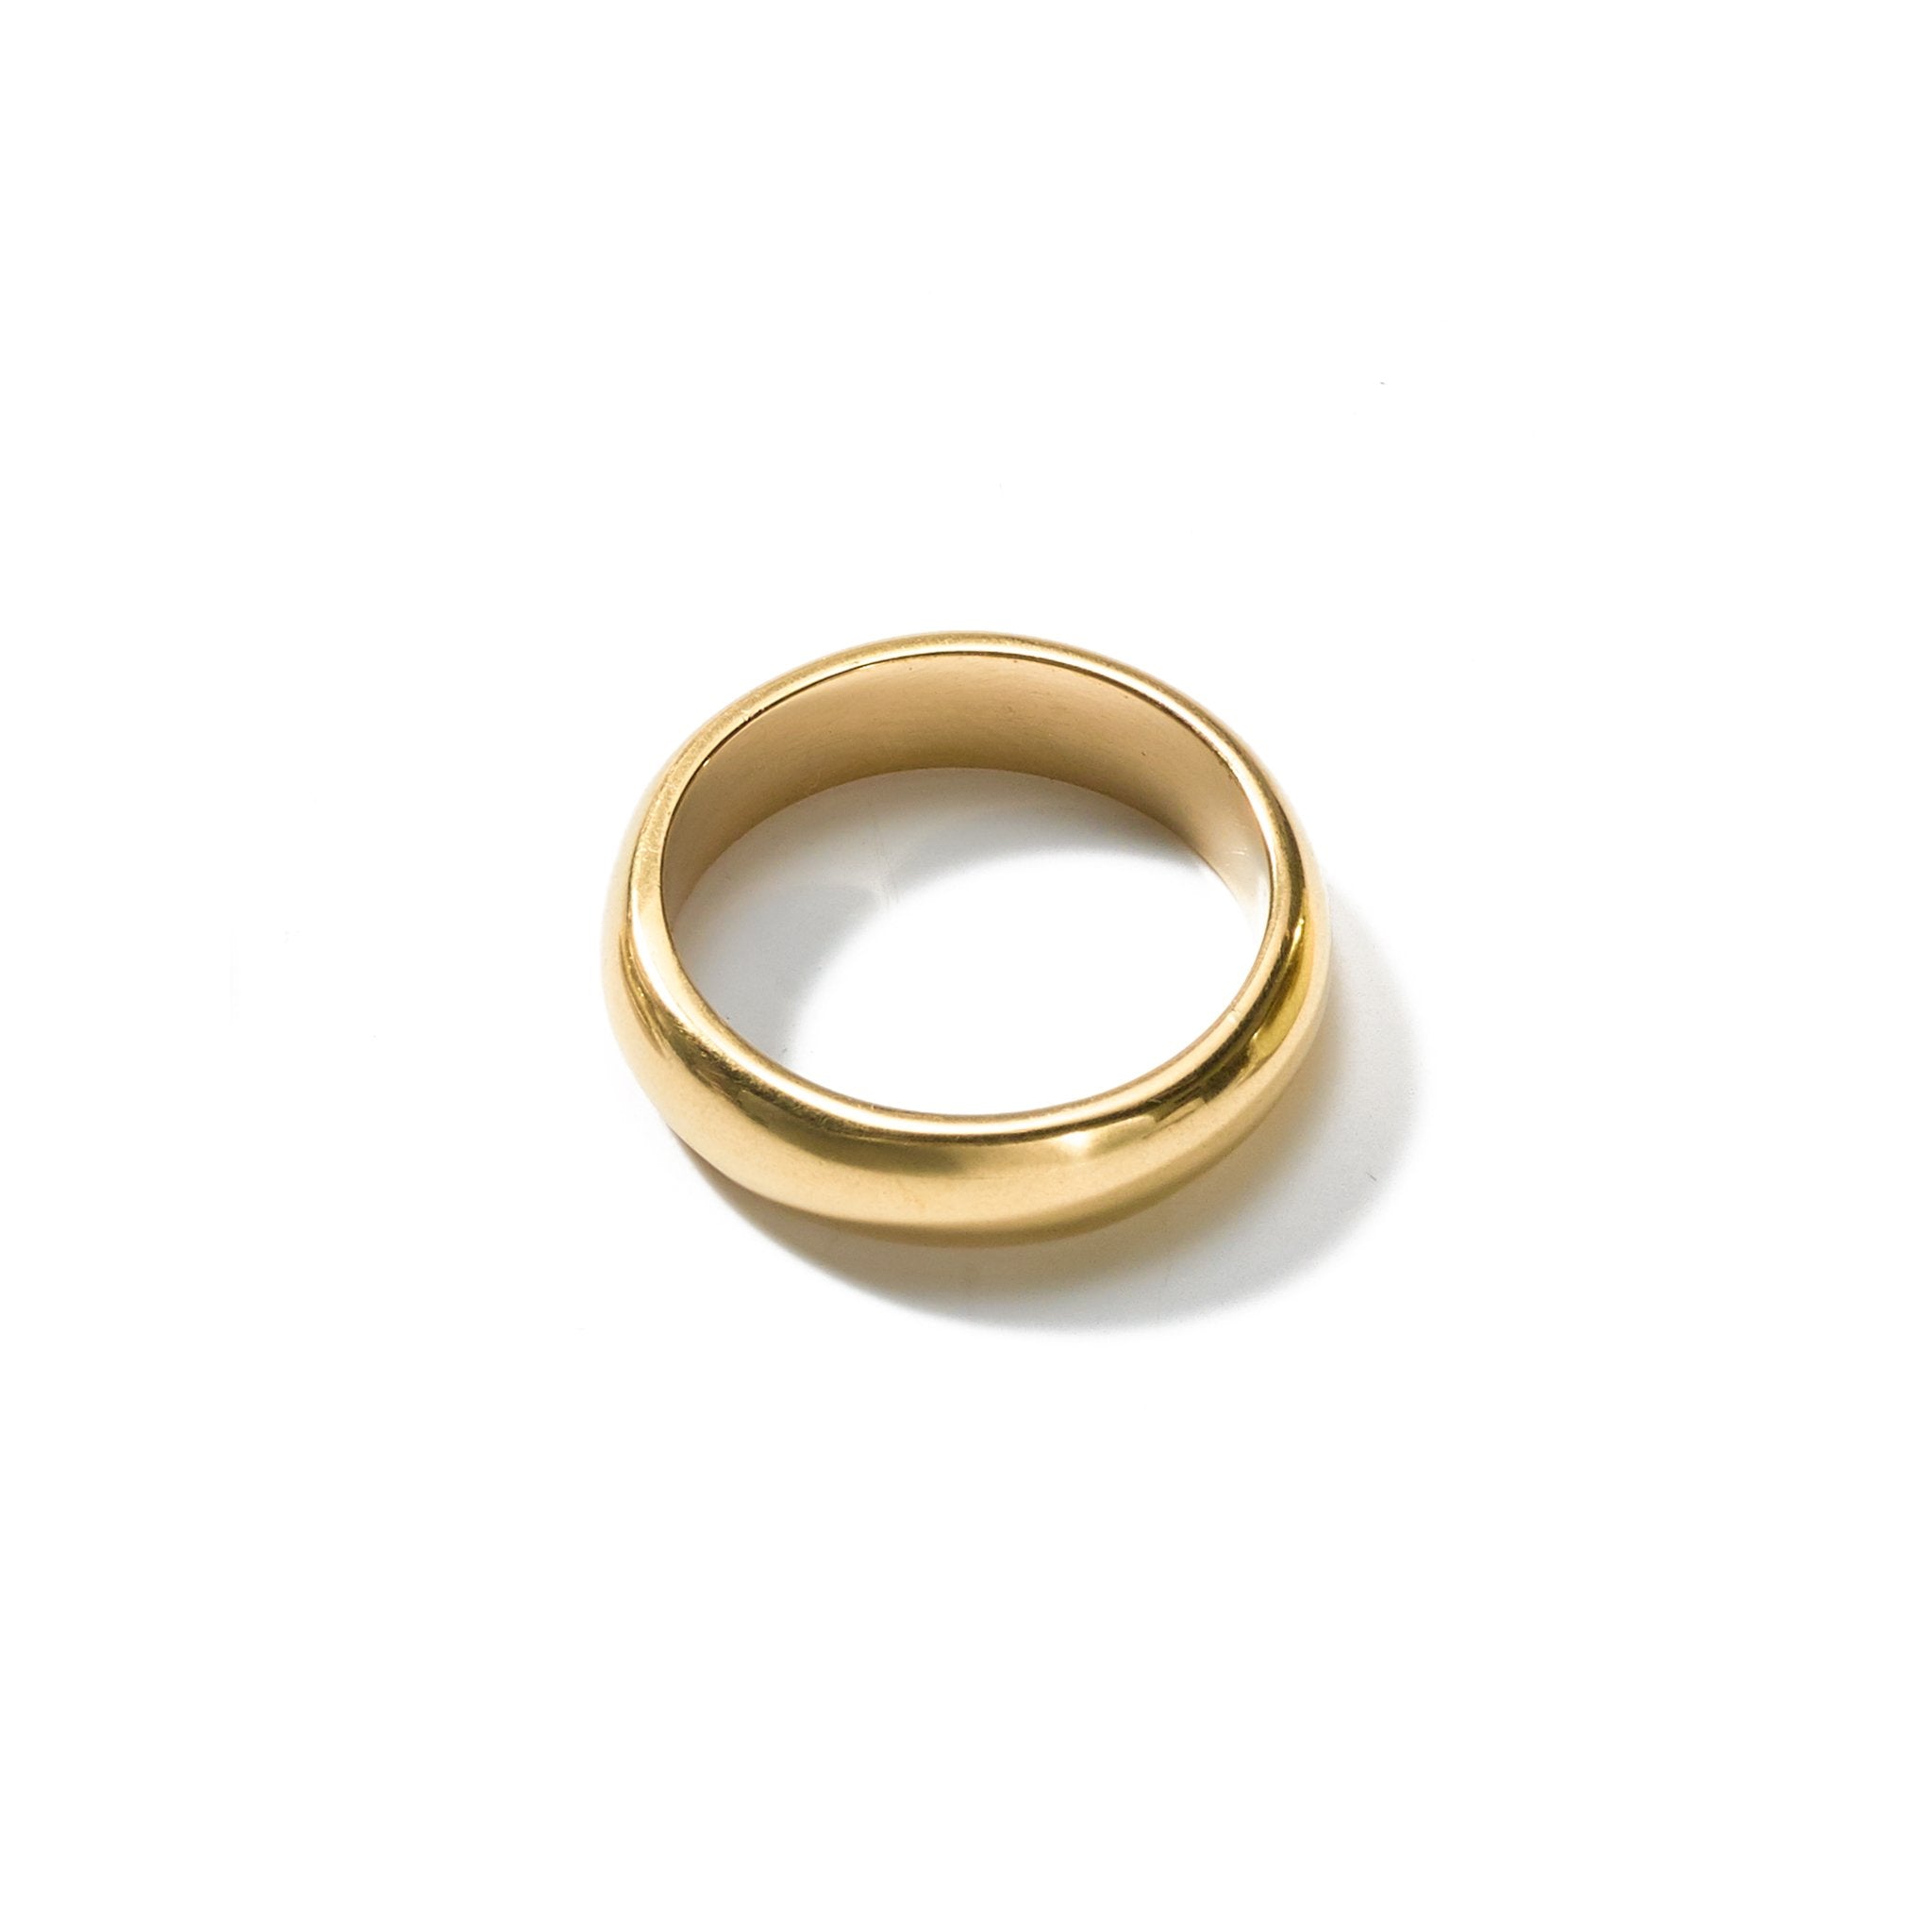 A simple yet elegant size 4.5 ring handcrafted from upcycled brass, featuring a narrow width, and made to be worn every day.